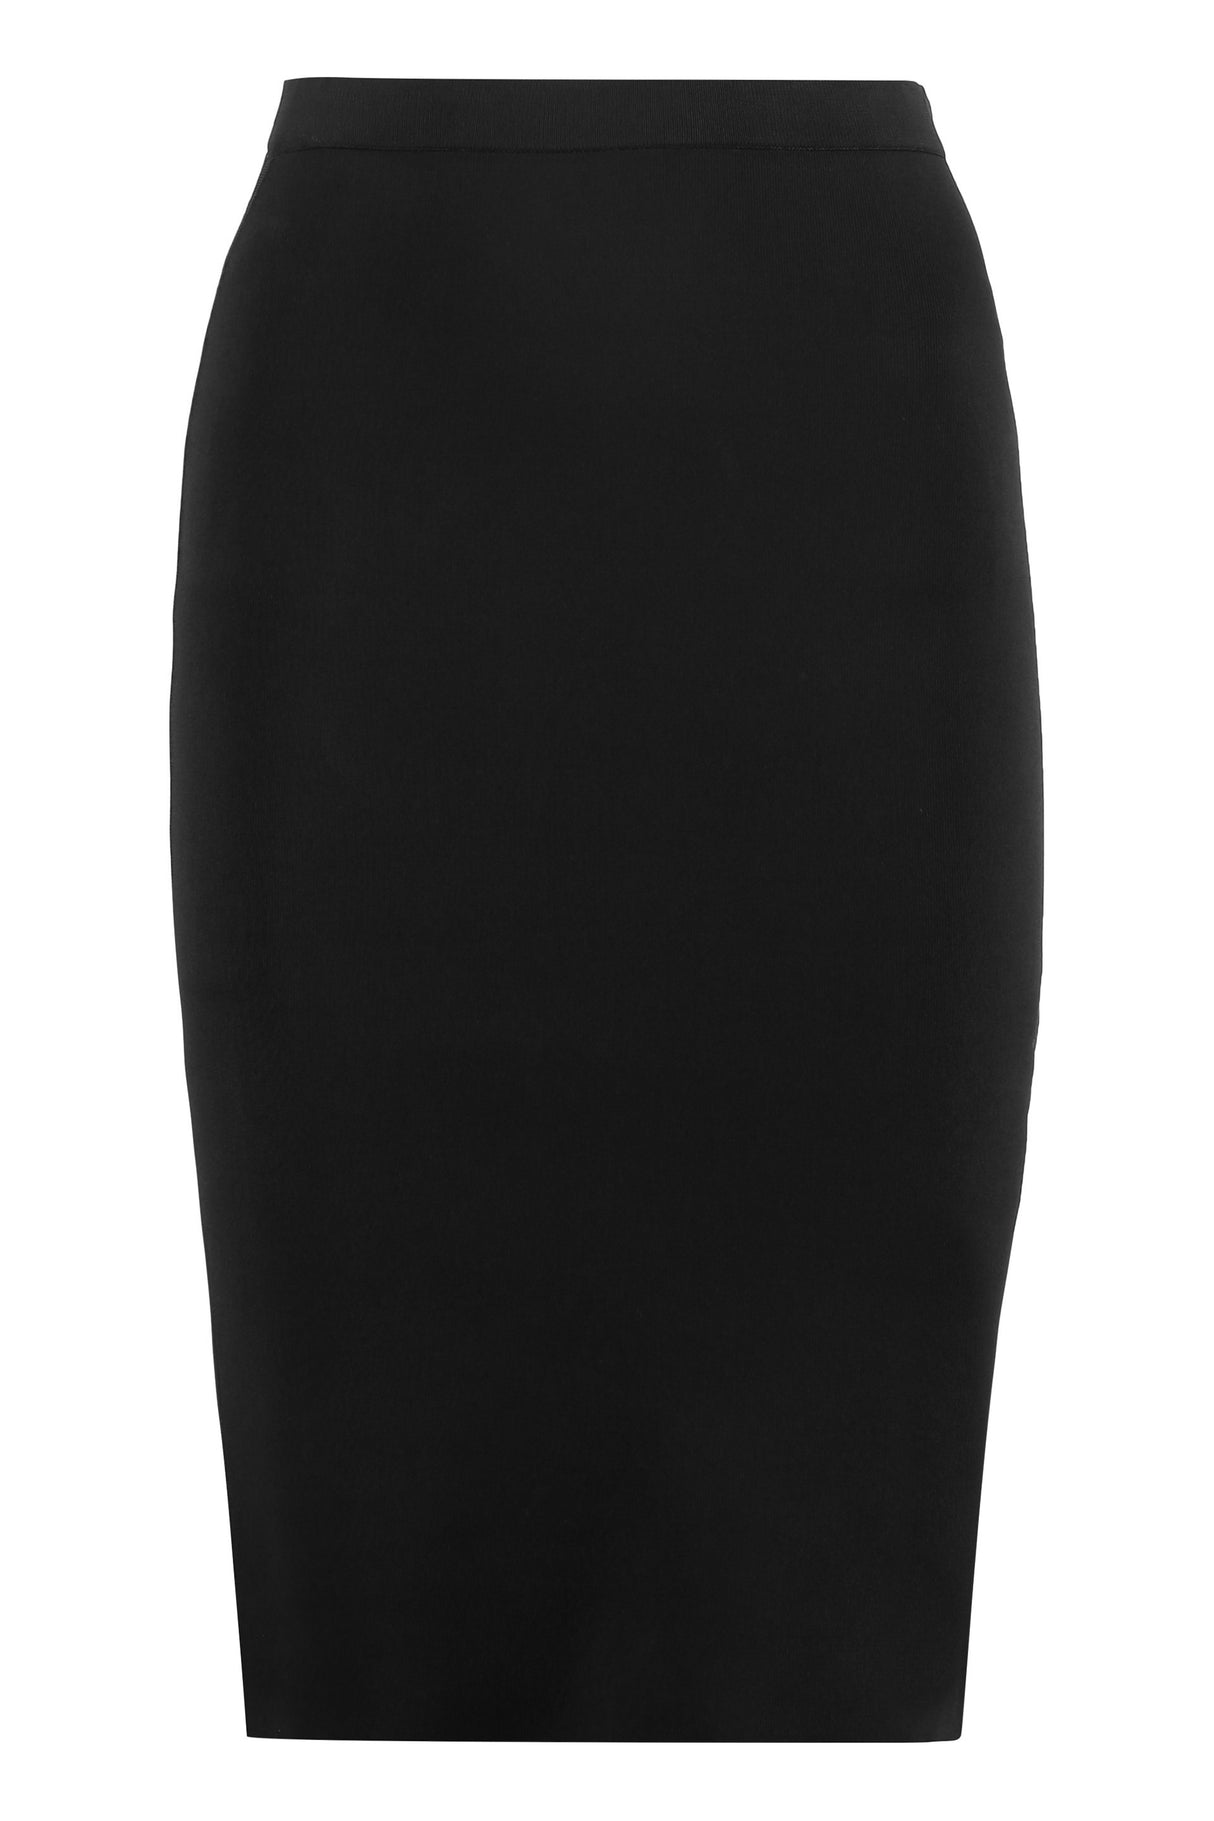 Stretch Pencil Skirt - FW23 Collection